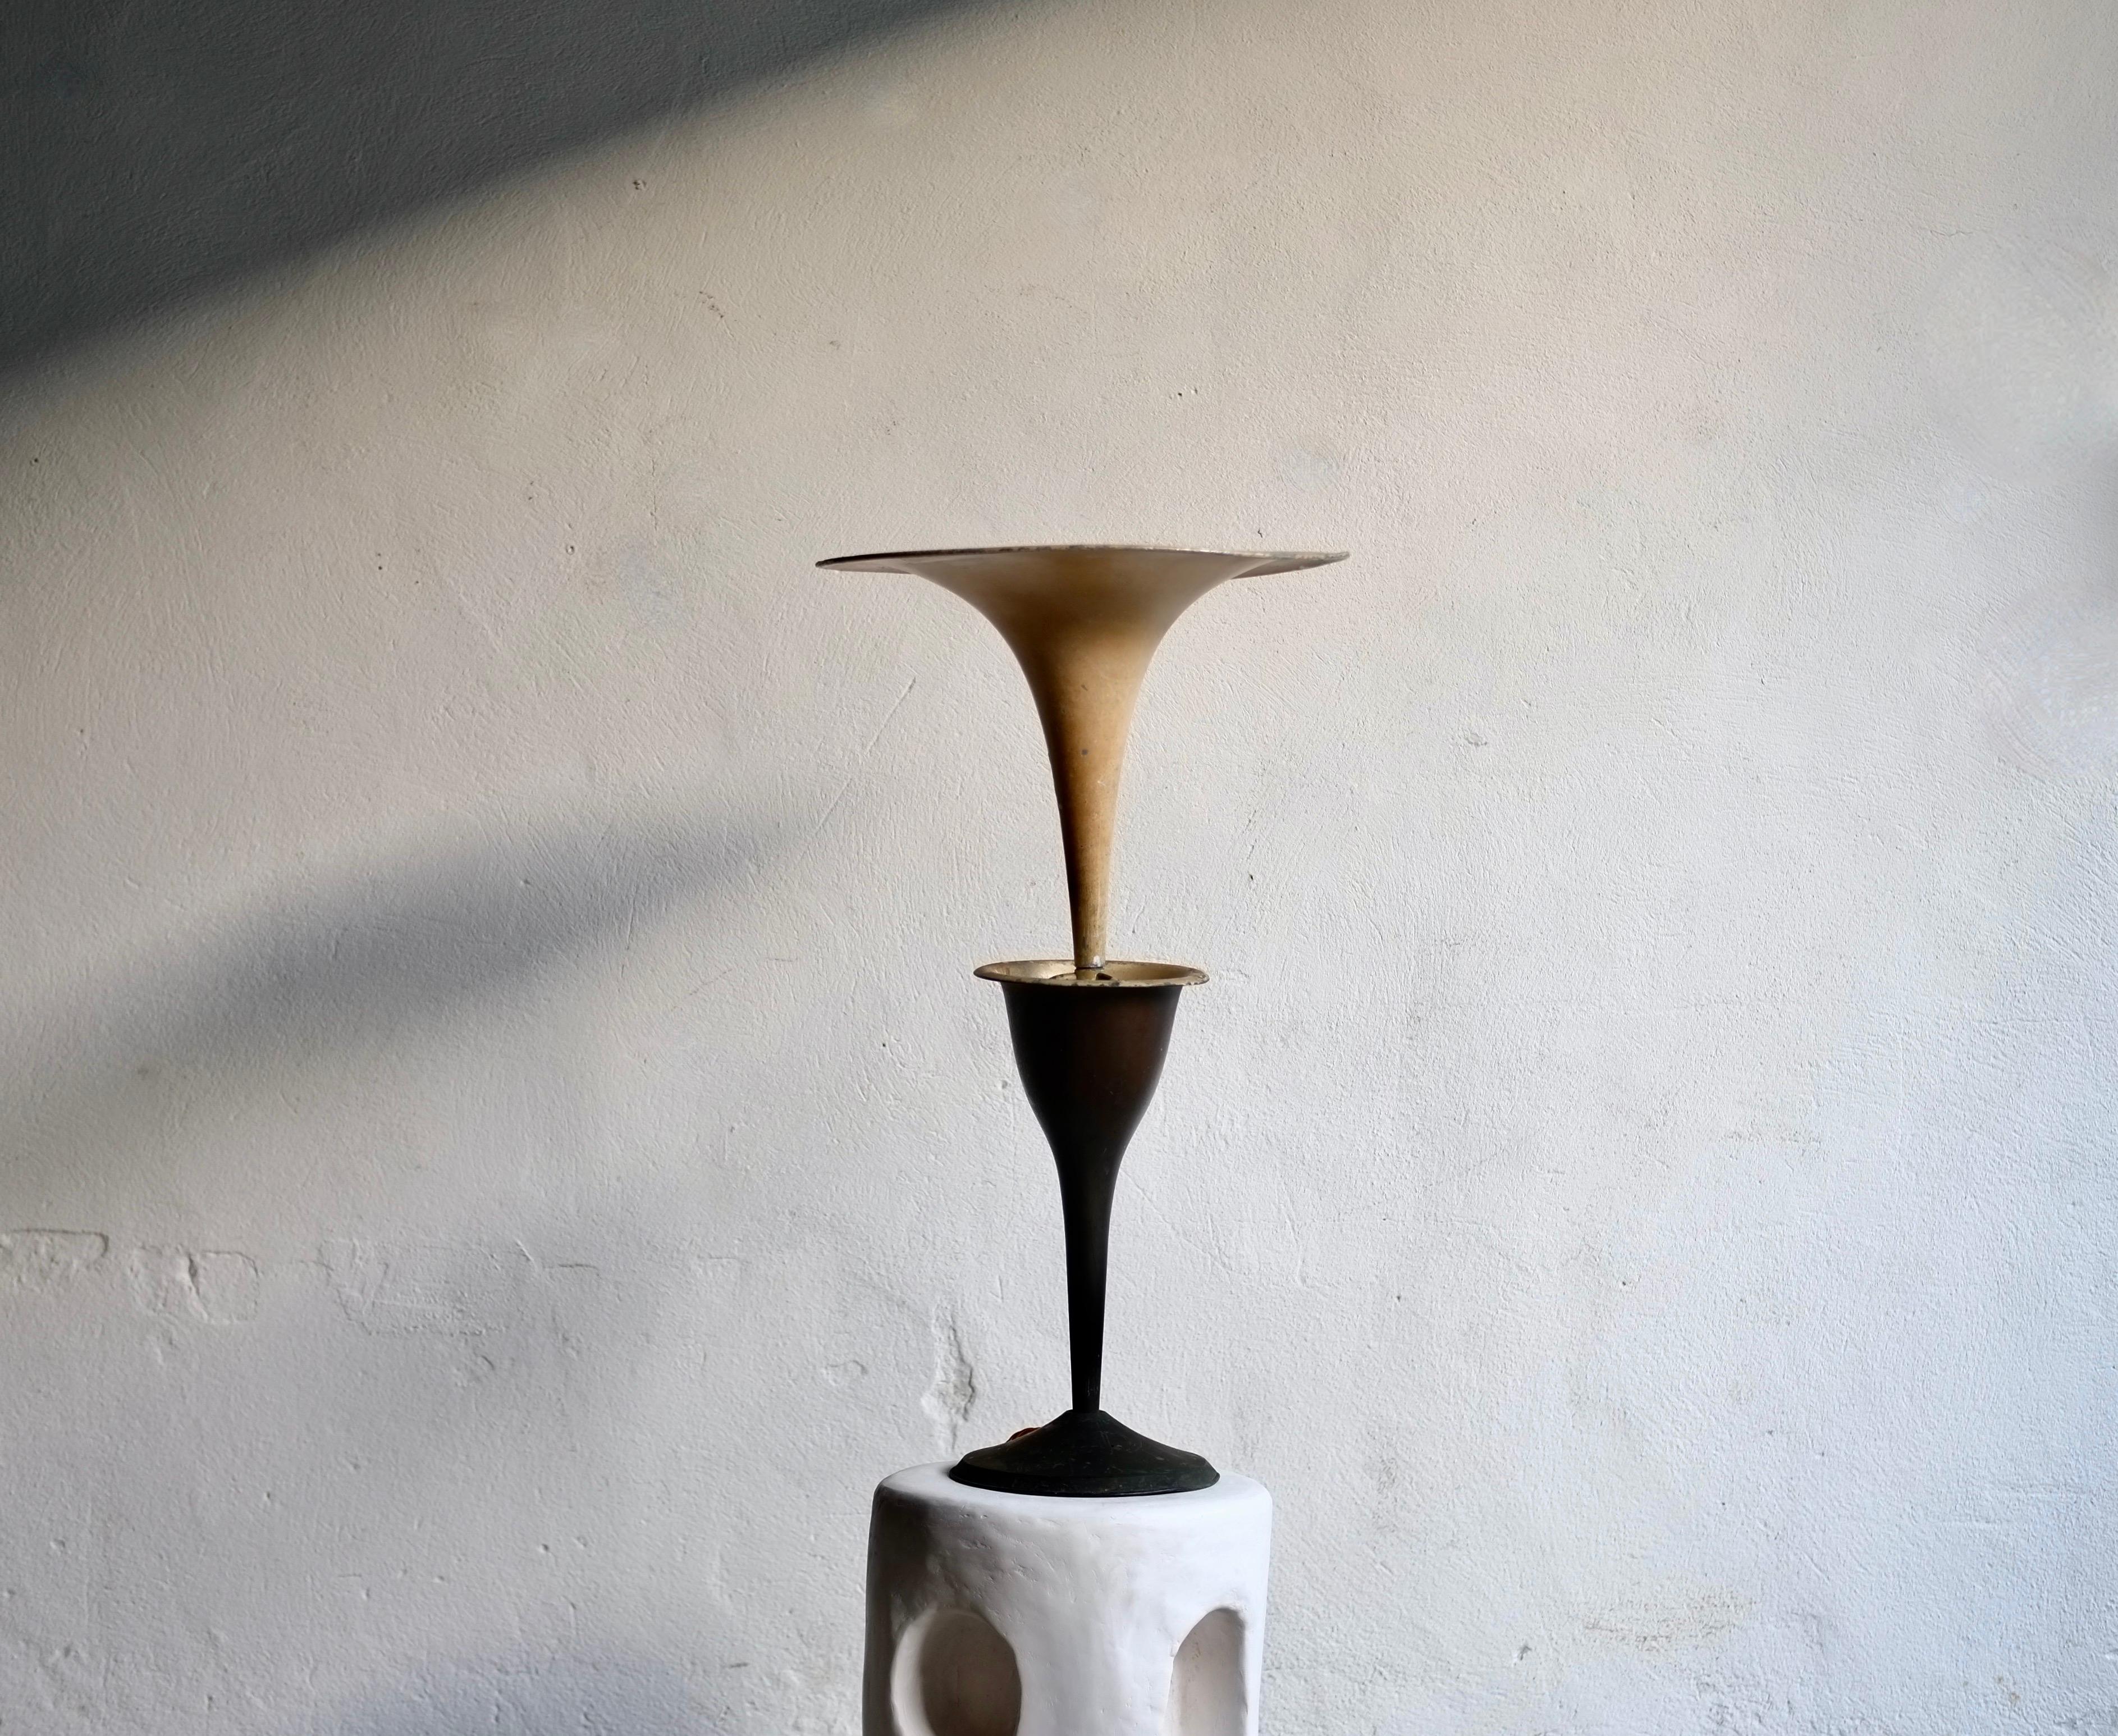 An incredibly rare Albatros lamp produced by Osram in 1934. The design of this lamp is often attributed to Josef Hoffmann. 

Incredibly sculptural and surprisingly tall, the lamp is a personal favourite. Featuring the most wonderful aged patinated